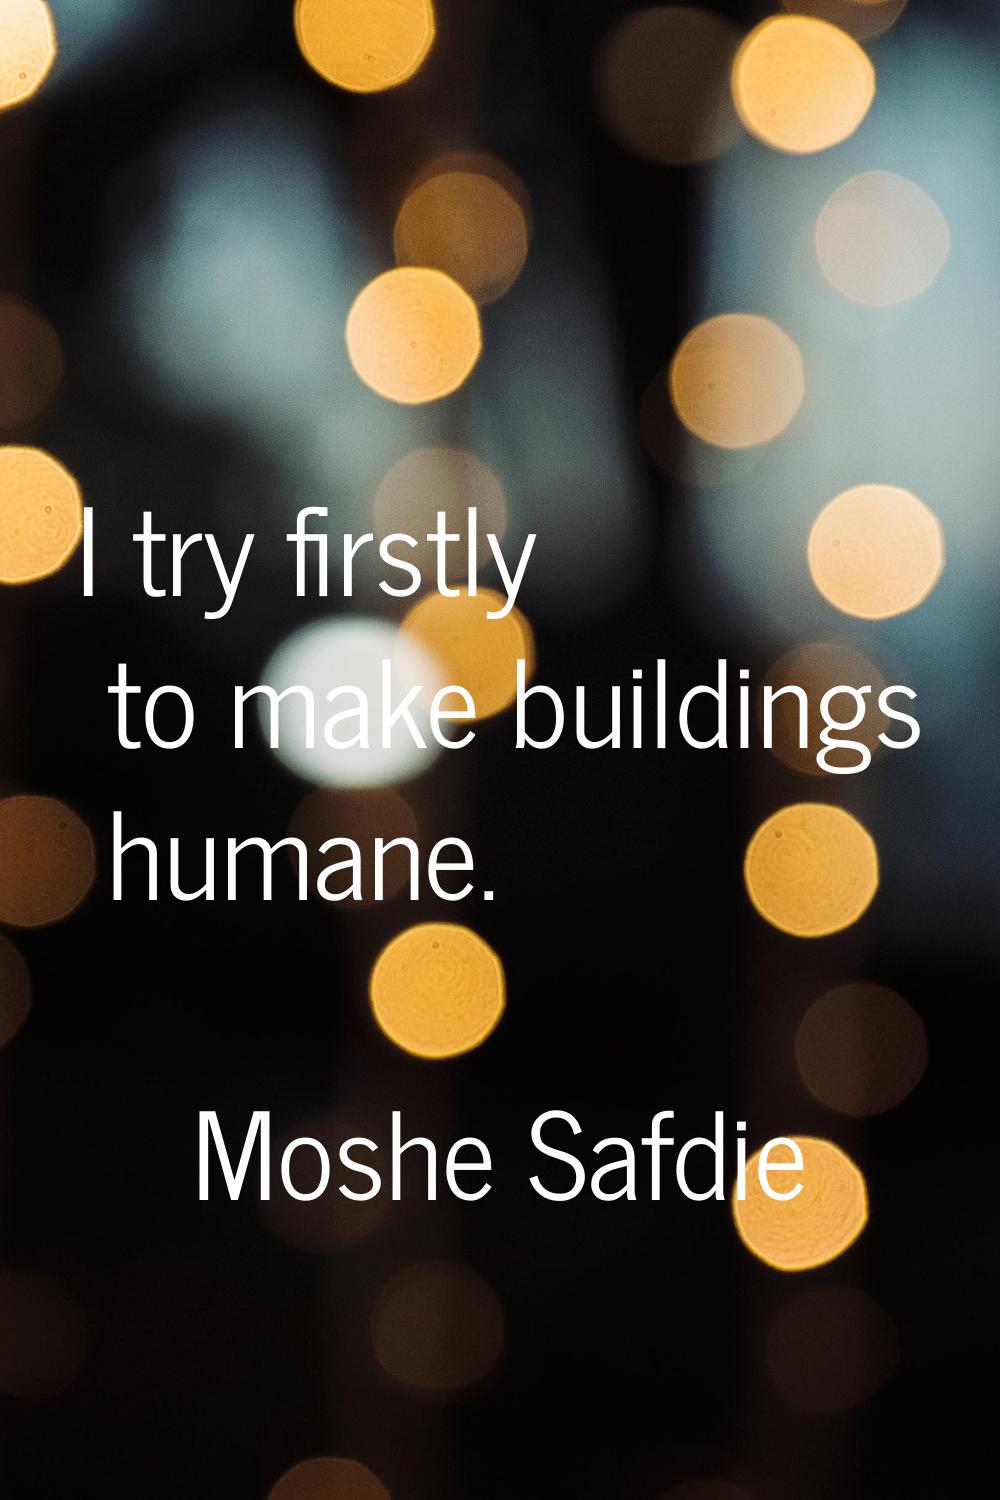 I try firstly to make buildings humane.